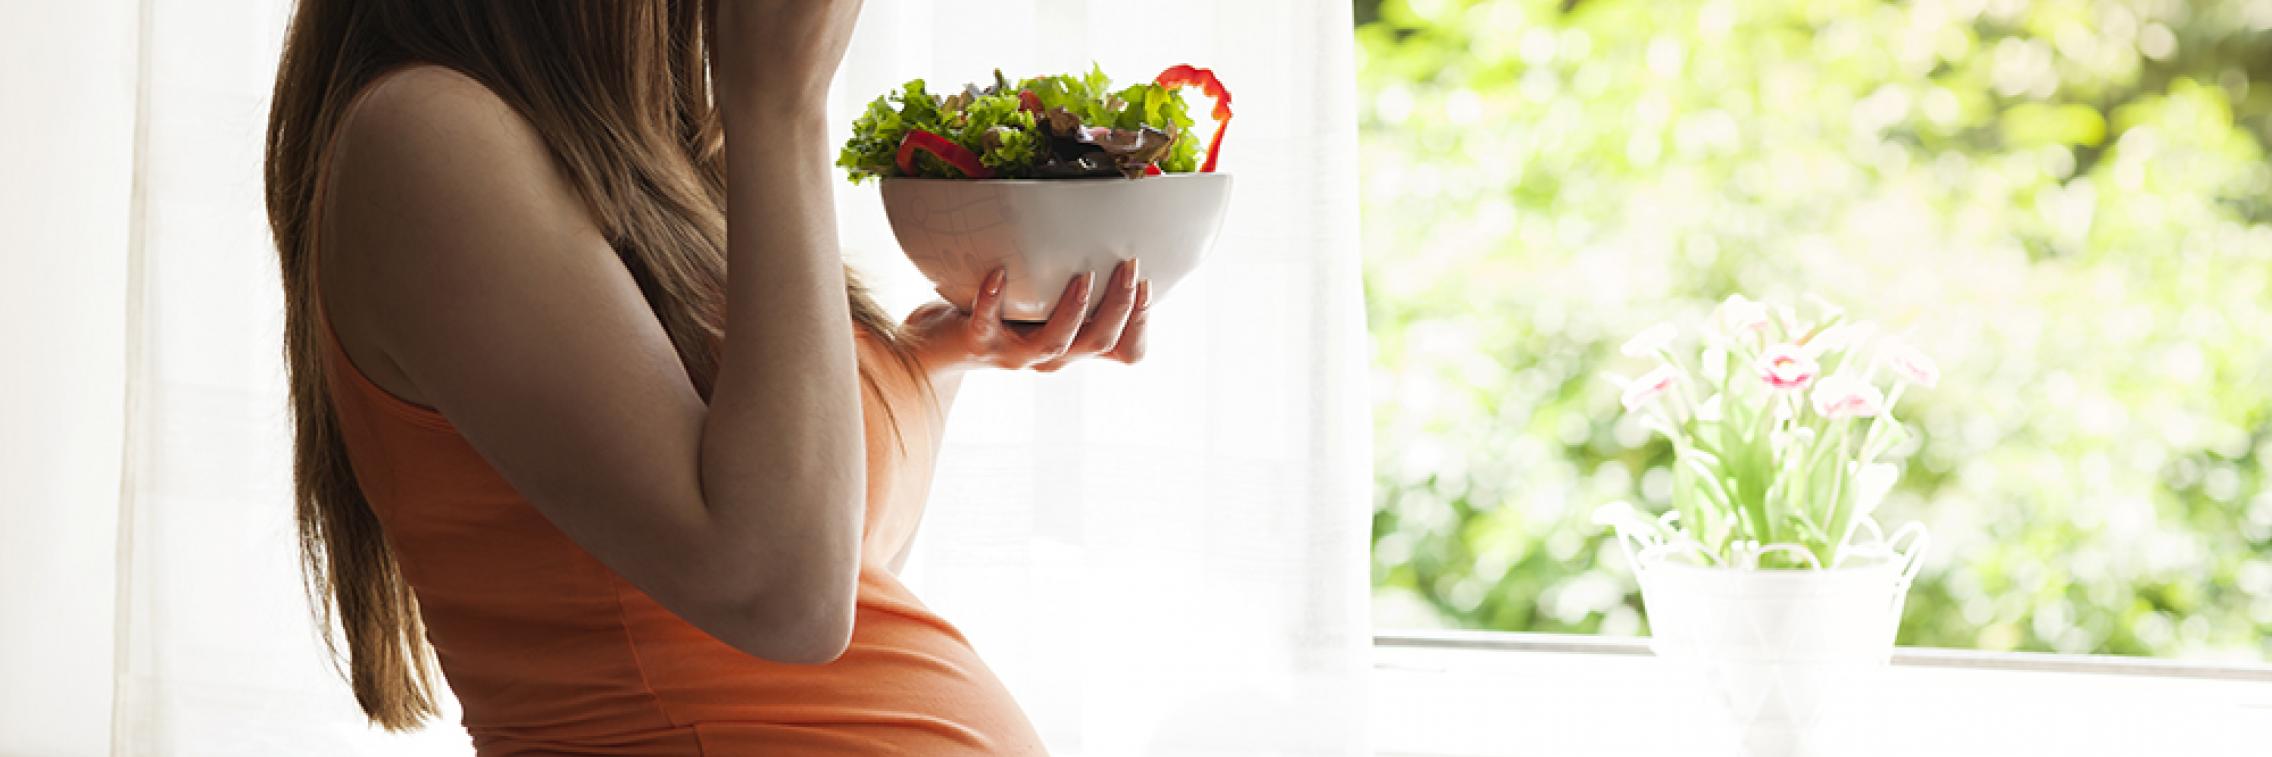 Dietary concerns of Aussie mums and bubs